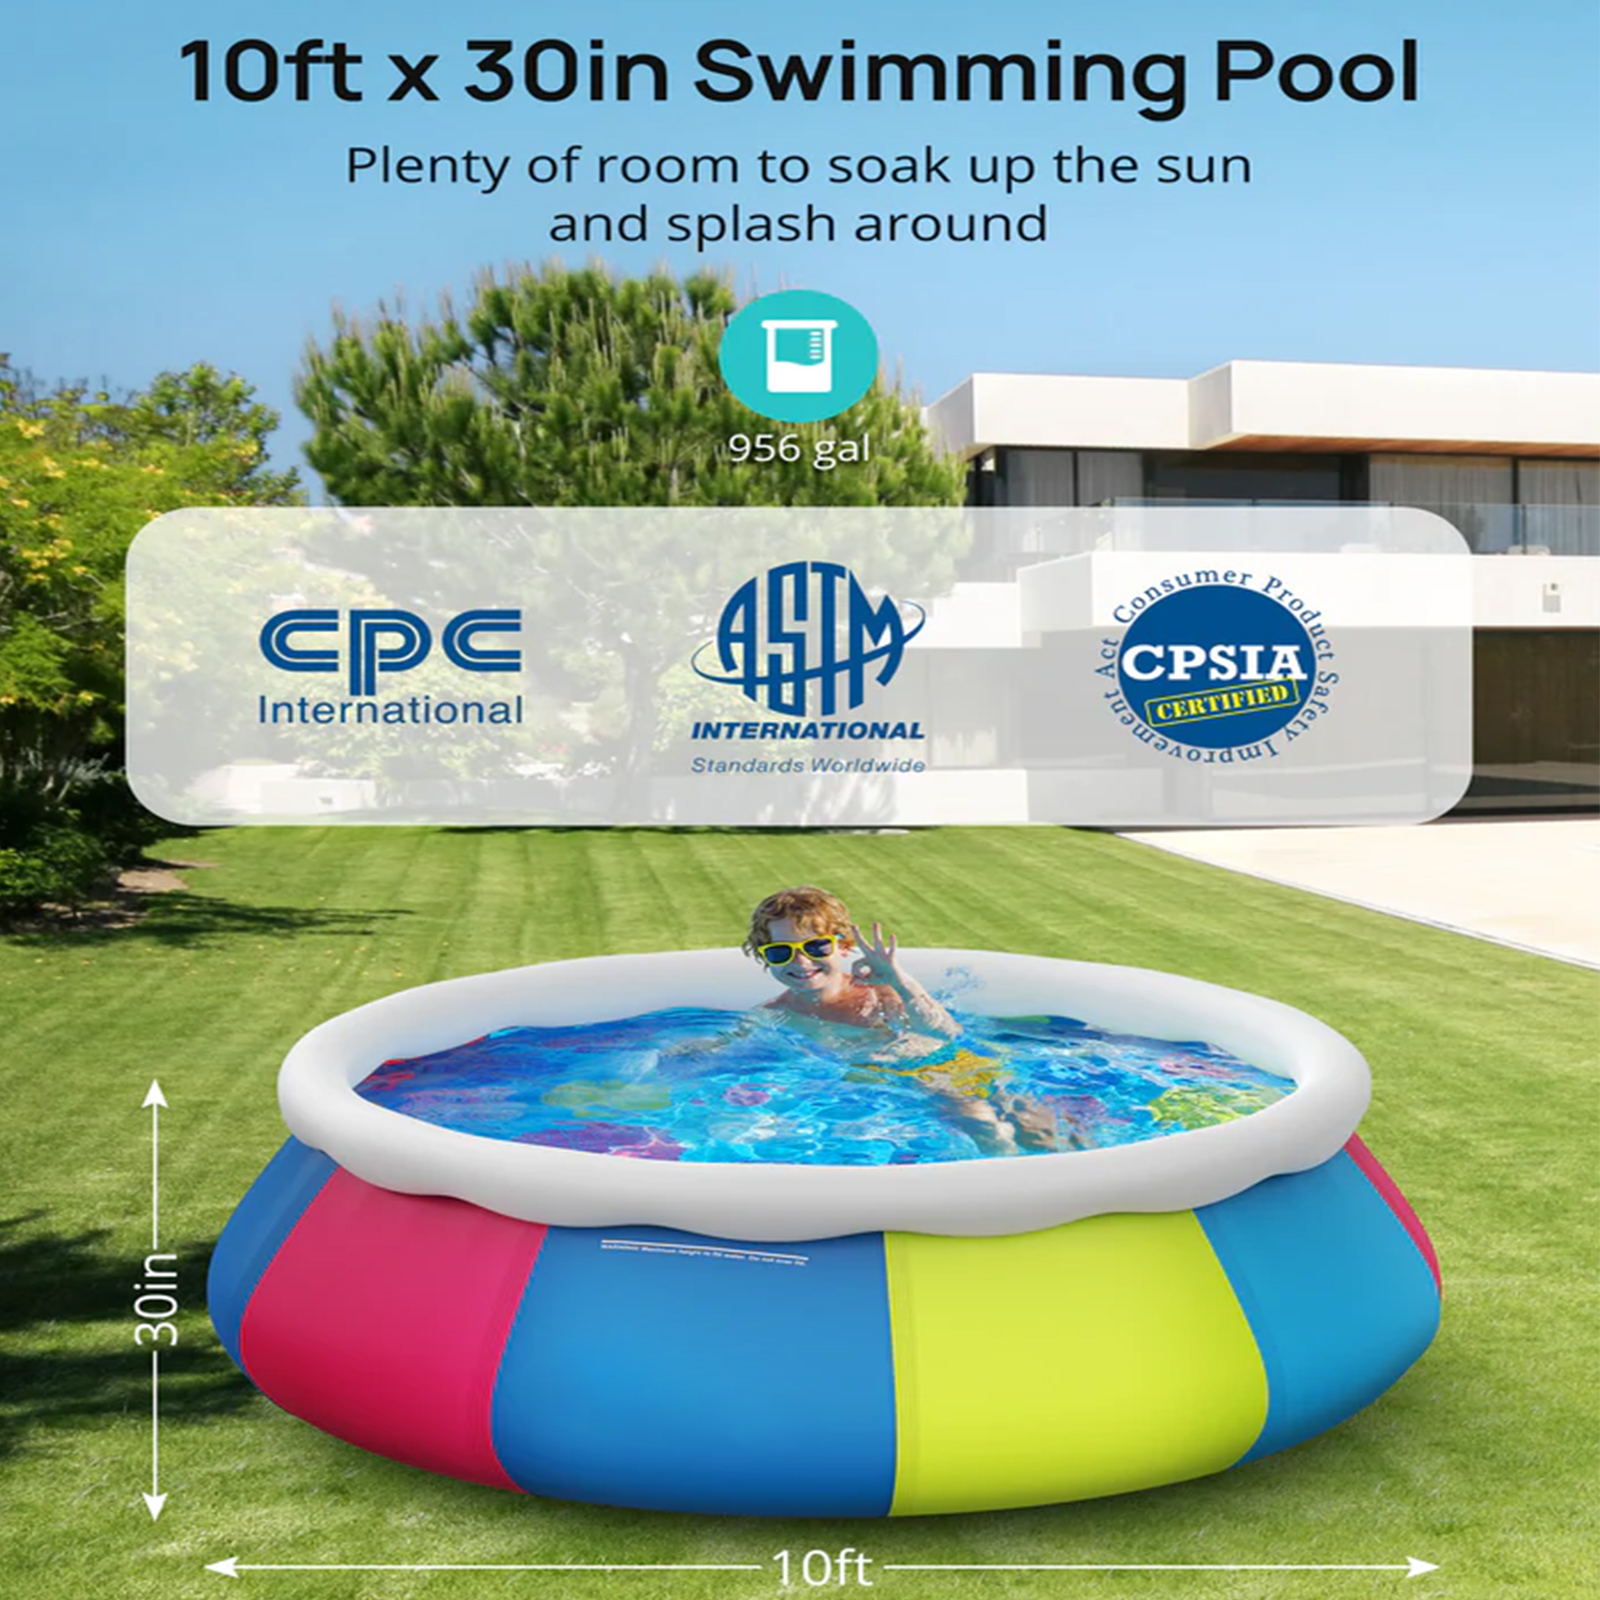 Family 10ft x 30in Above Ground Inflatable Round Swimming Pool - image 3 of 7